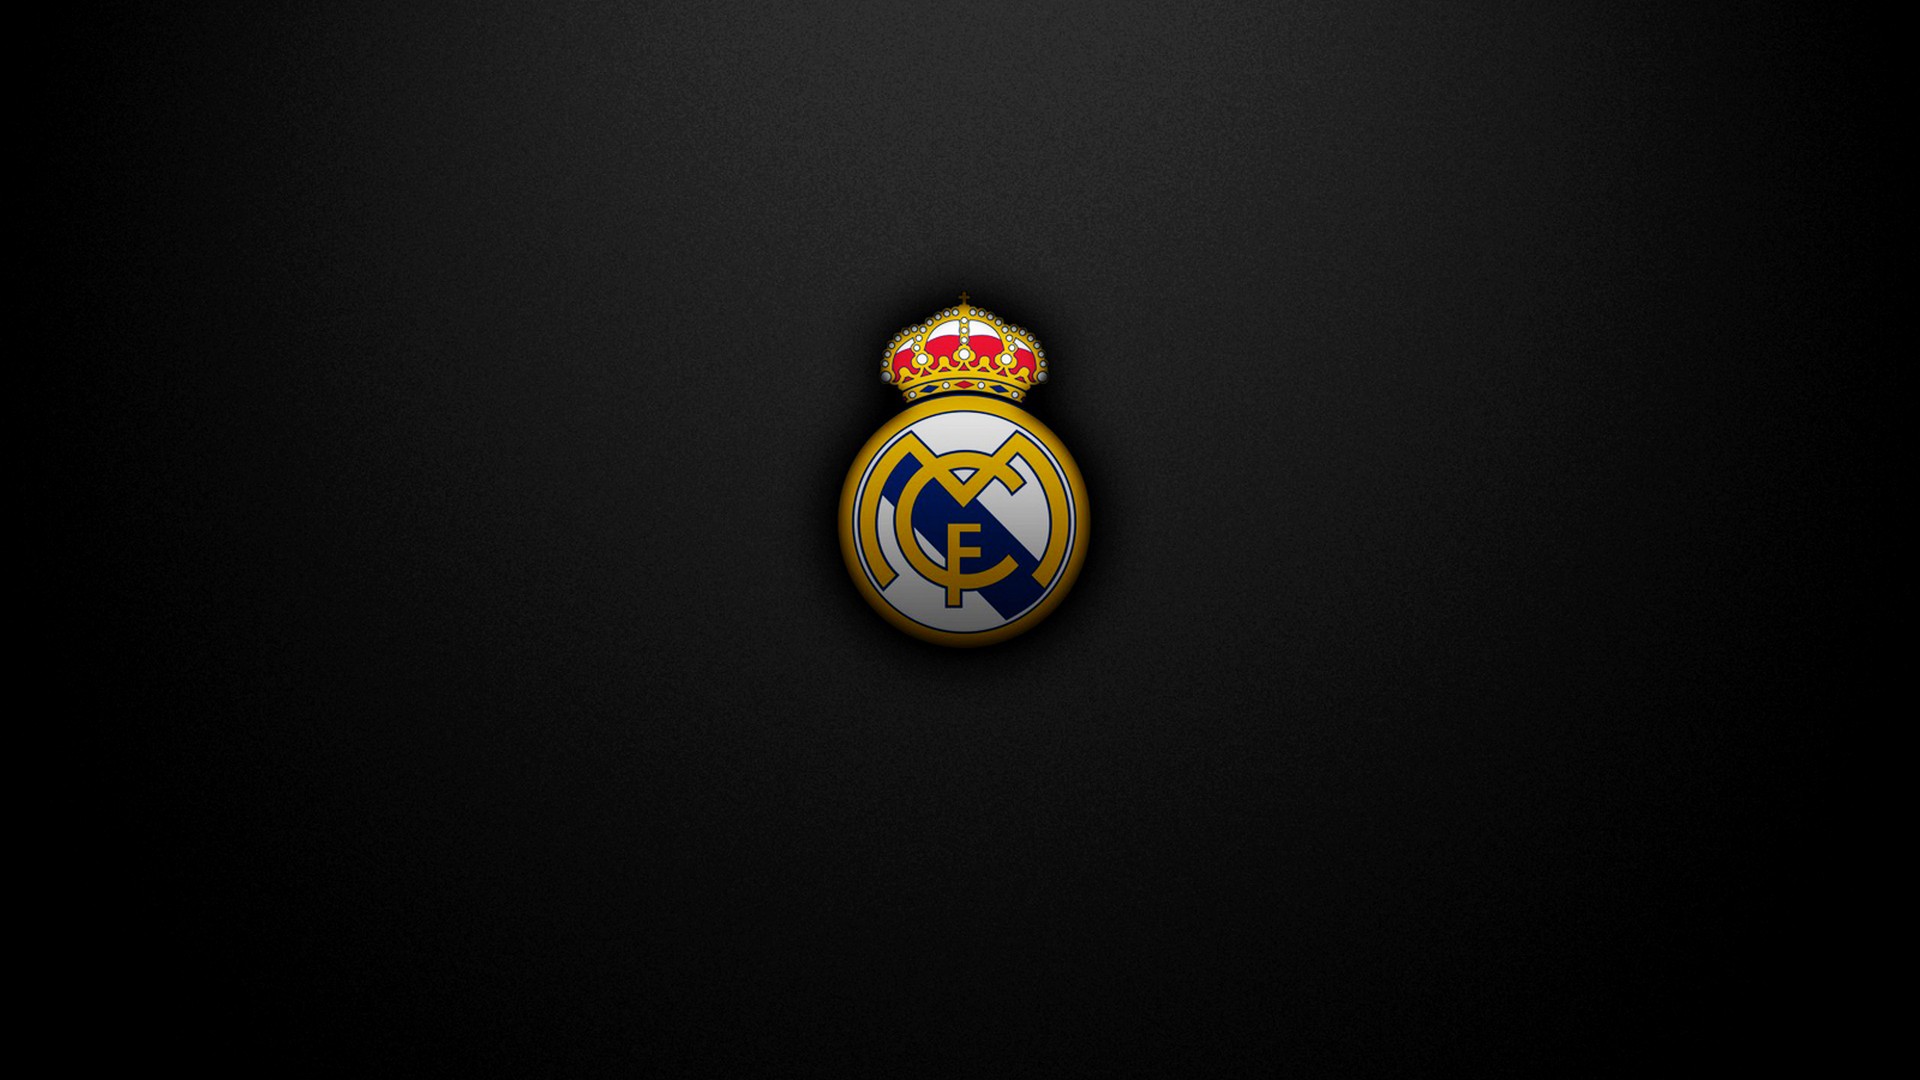 HD Backgrounds Real Madrid With Resolution 1920X1080 pixel. You can make this wallpaper for your Mac or Windows Desktop Background, iPhone, Android or Tablet and another Smartphone device for free